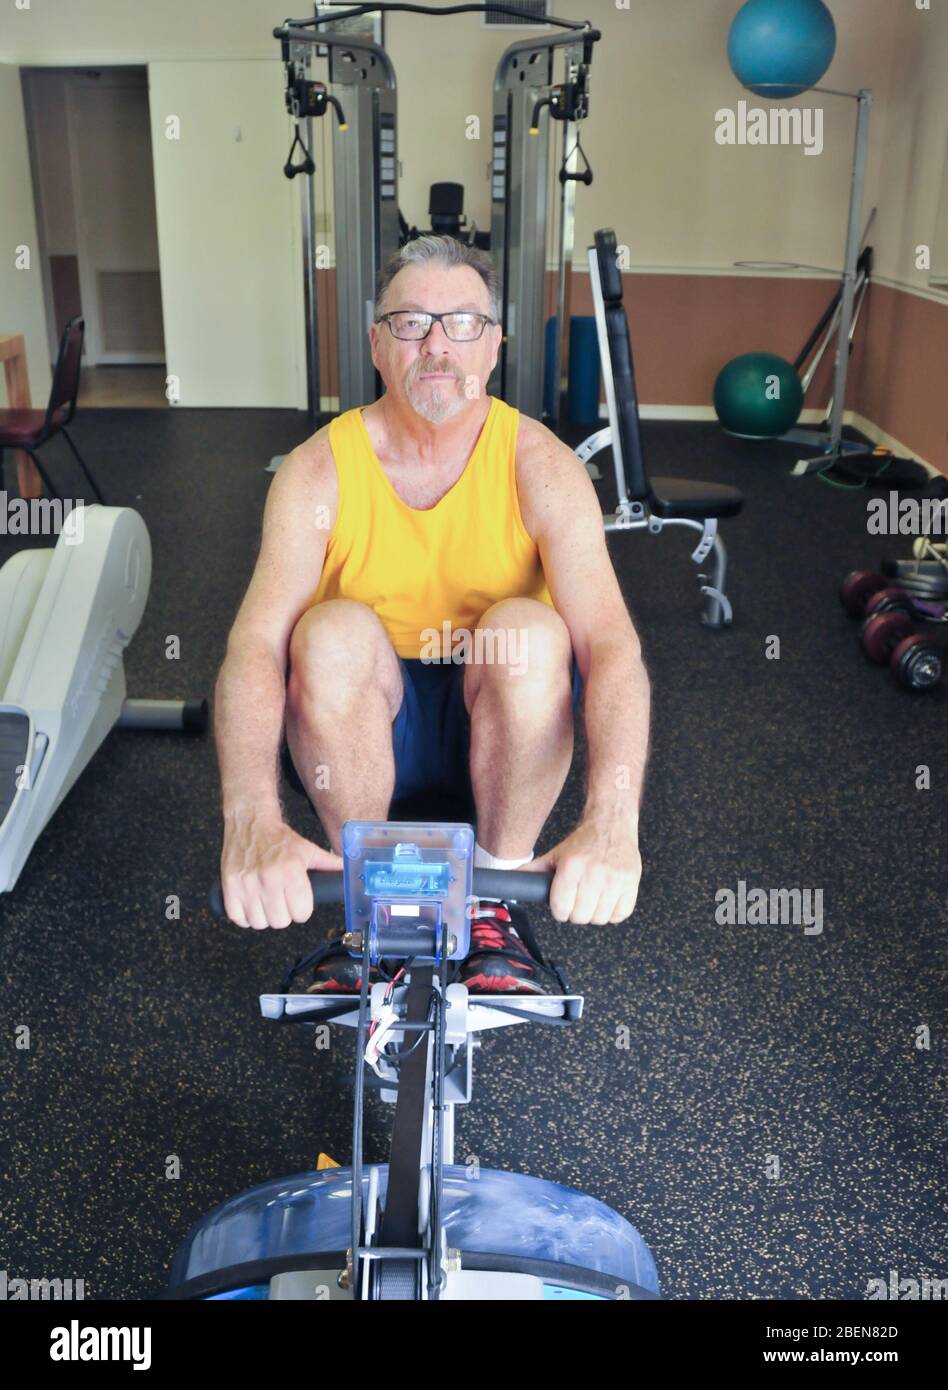 A senior citizen uses a rowing machine in the gym Stock Photo